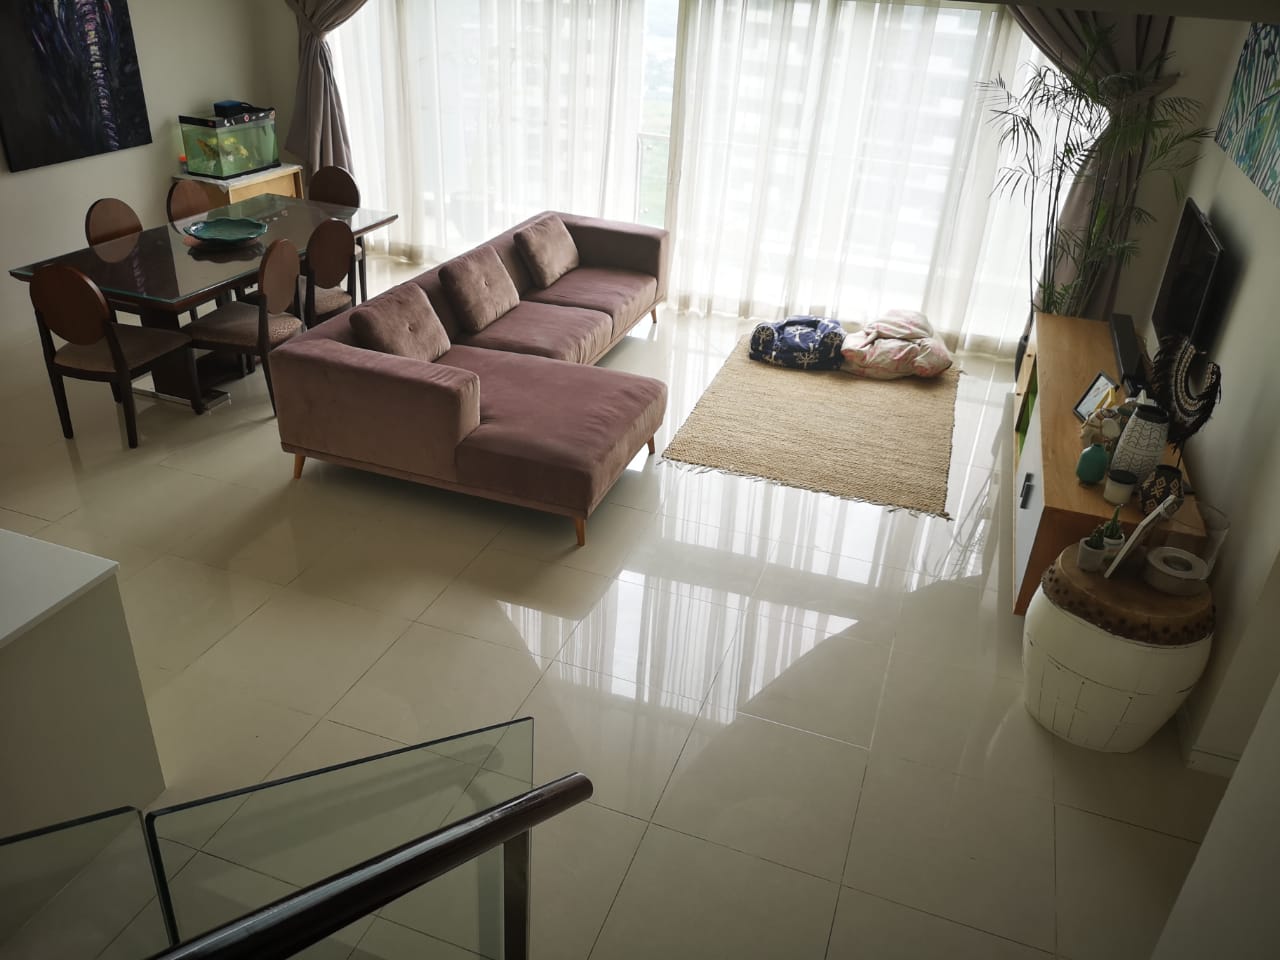 4 Bedroom Apartment (The Estella) for rent in An Phu Ward, District 2, Ho Chi Minh City.